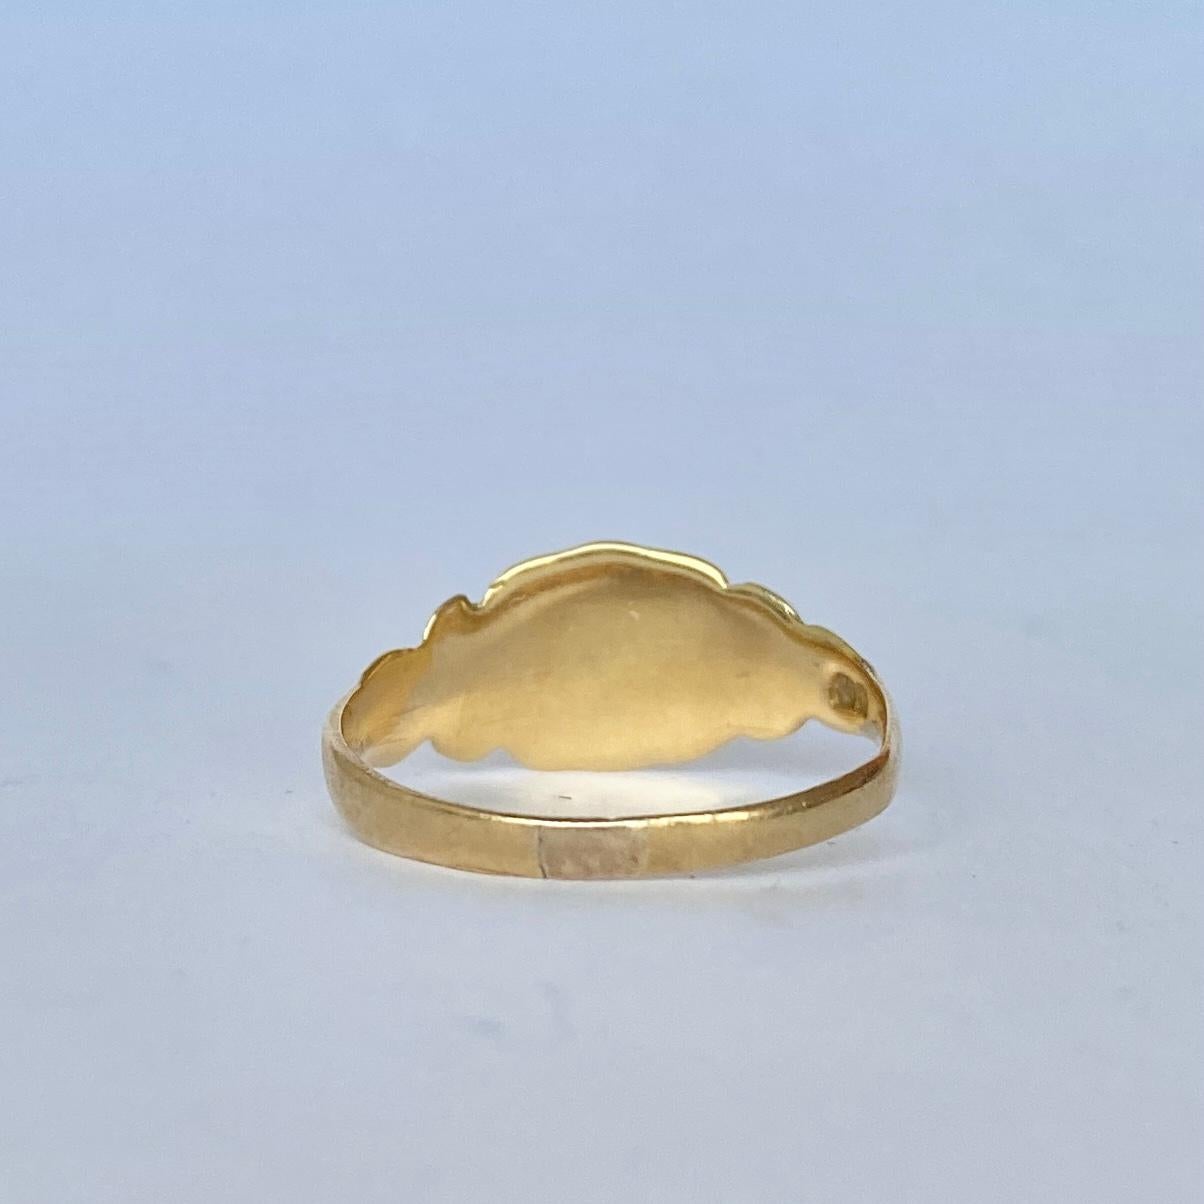 This signet ring has initials engraved into the face but are worn so hard to make out. Modelled in 18carat gold. 

Ring Size: N 1/2 or 7 
Face Diameter: 9x9mm

Weight: 2g